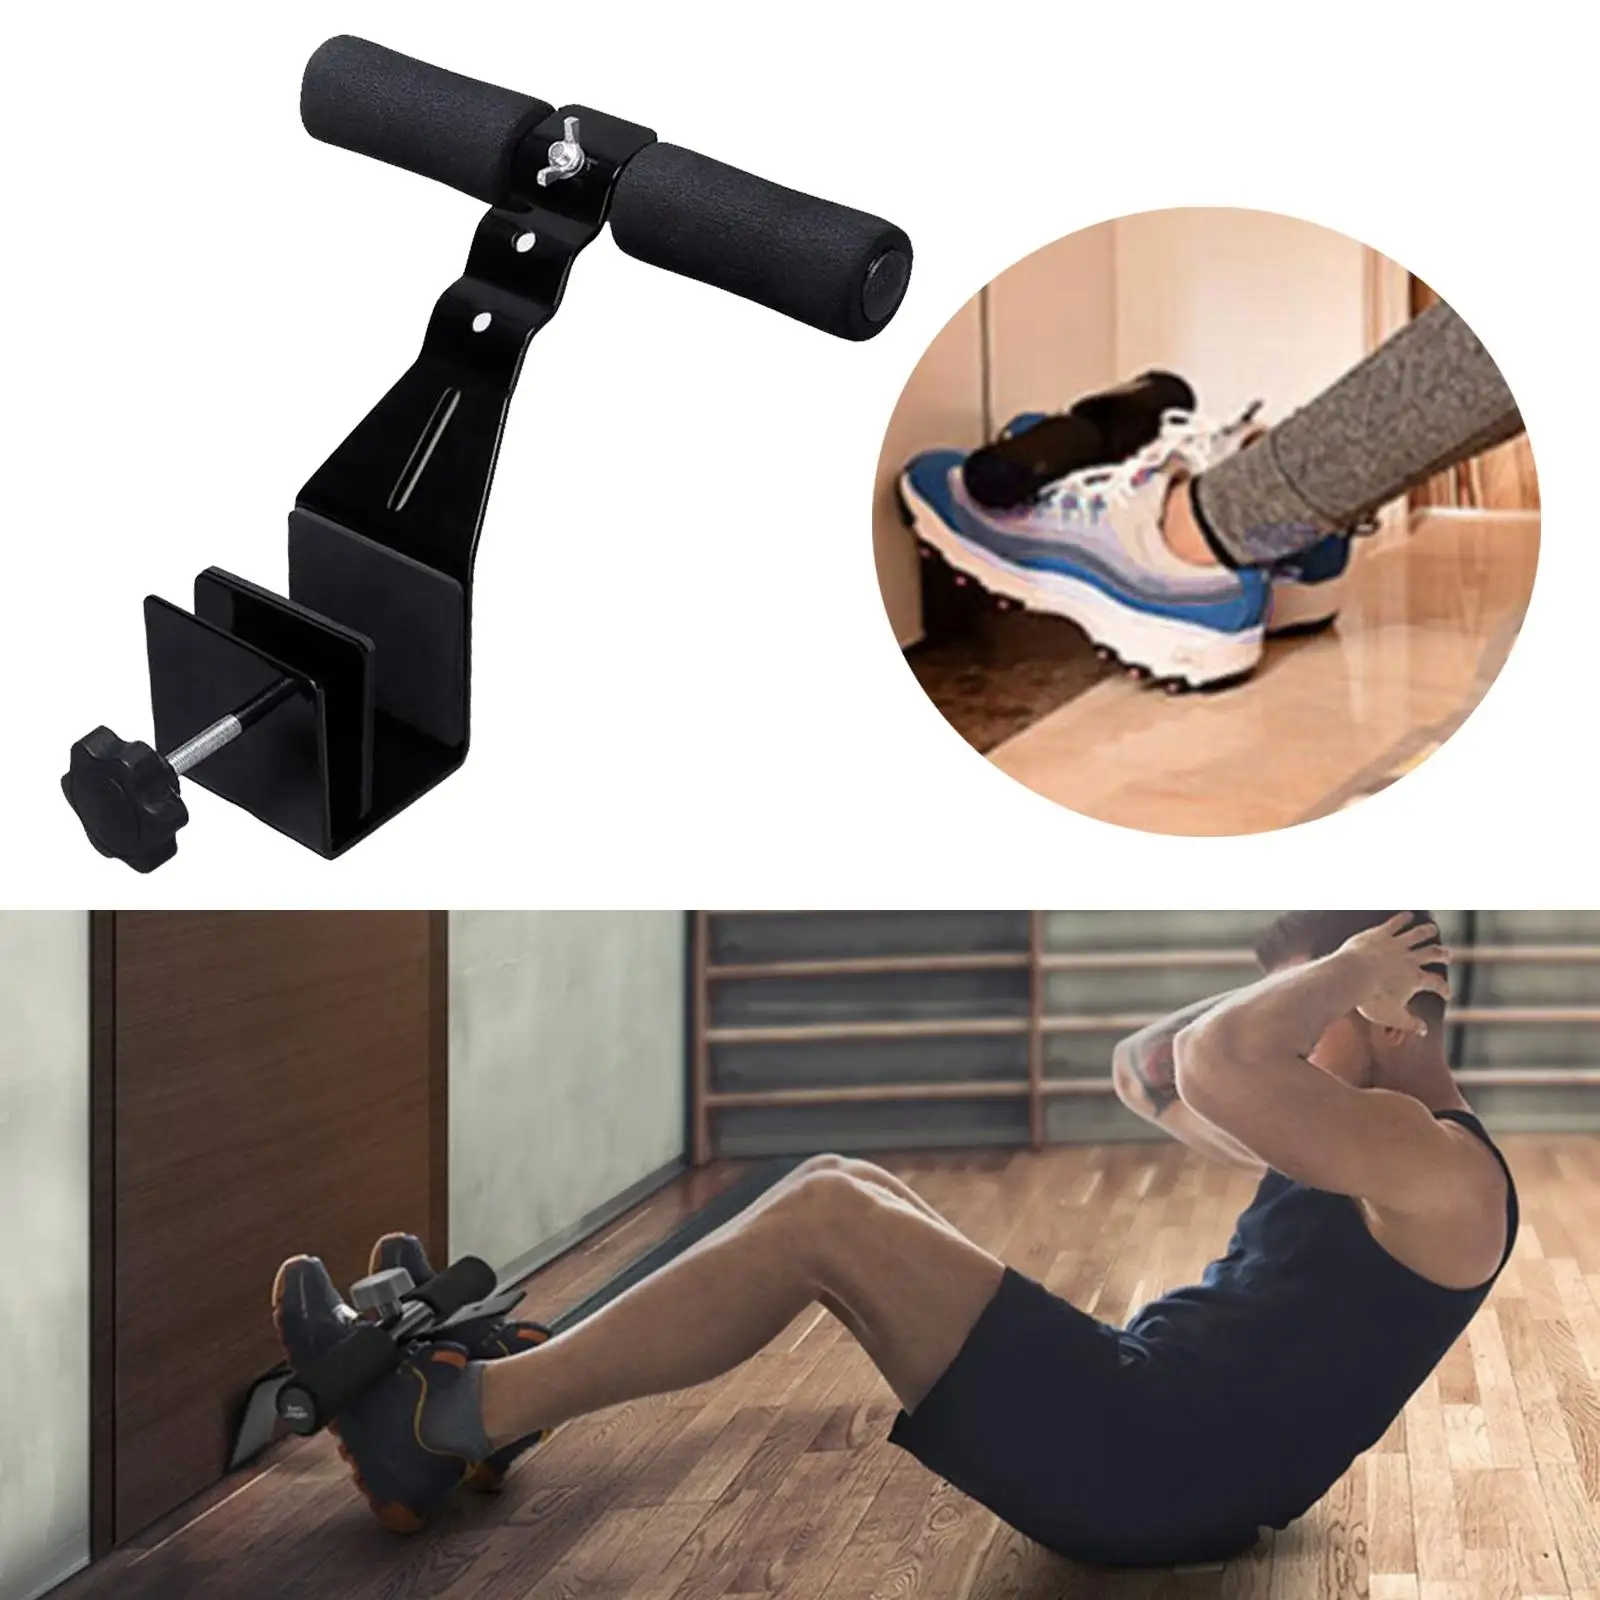 Black Sit up Bar Assistant Doorway Abdominal Fitness Gym Exercise Equipment